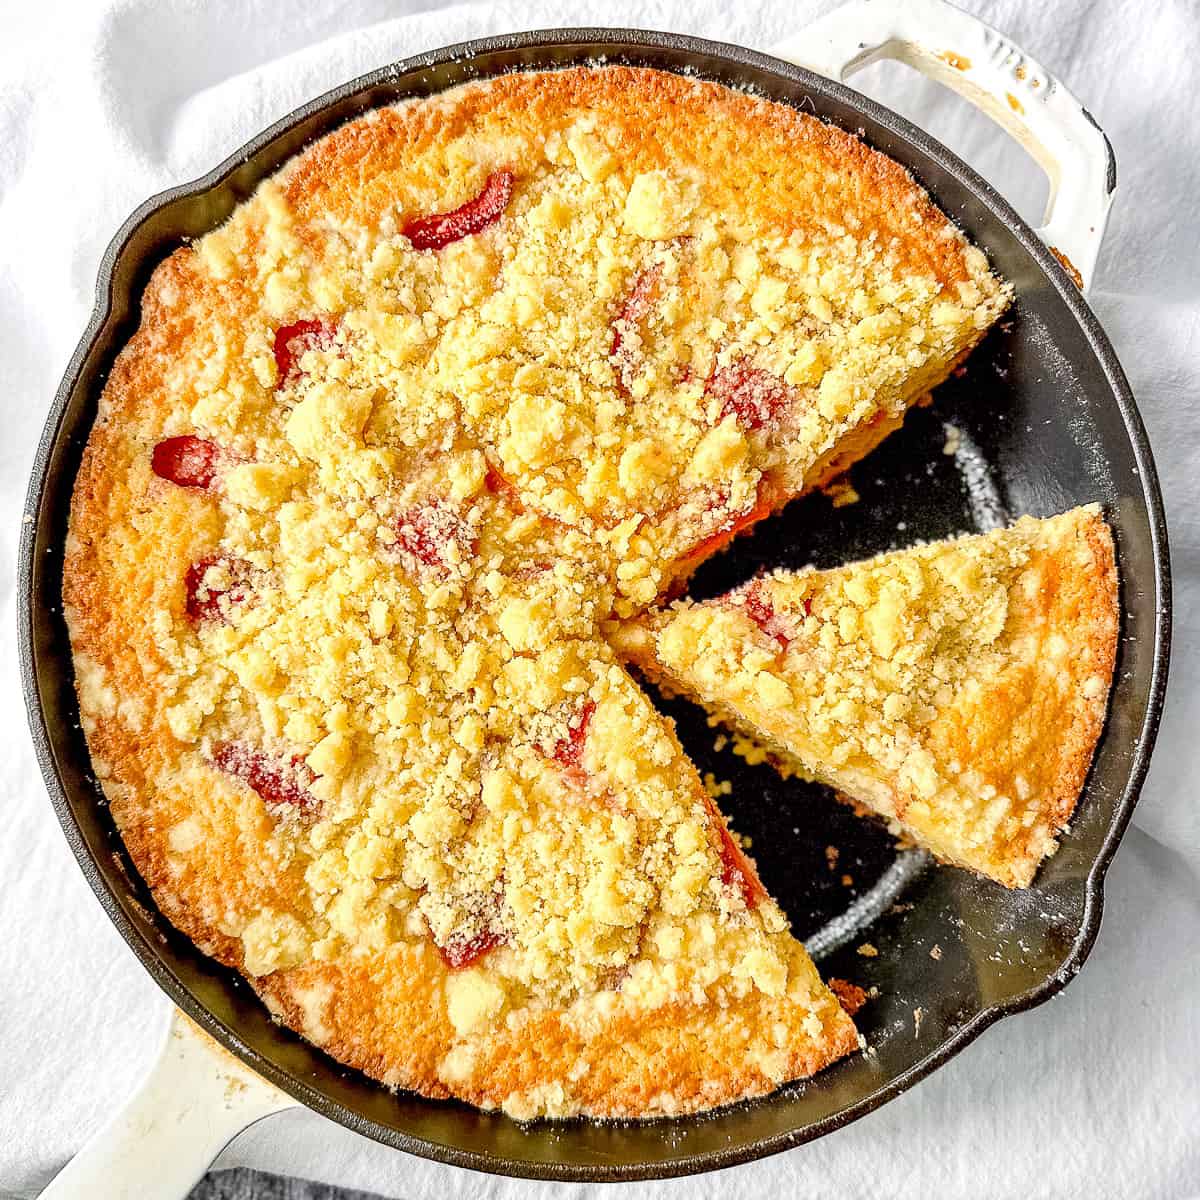 Cast iron pan with sliced strawberry peach buckle.